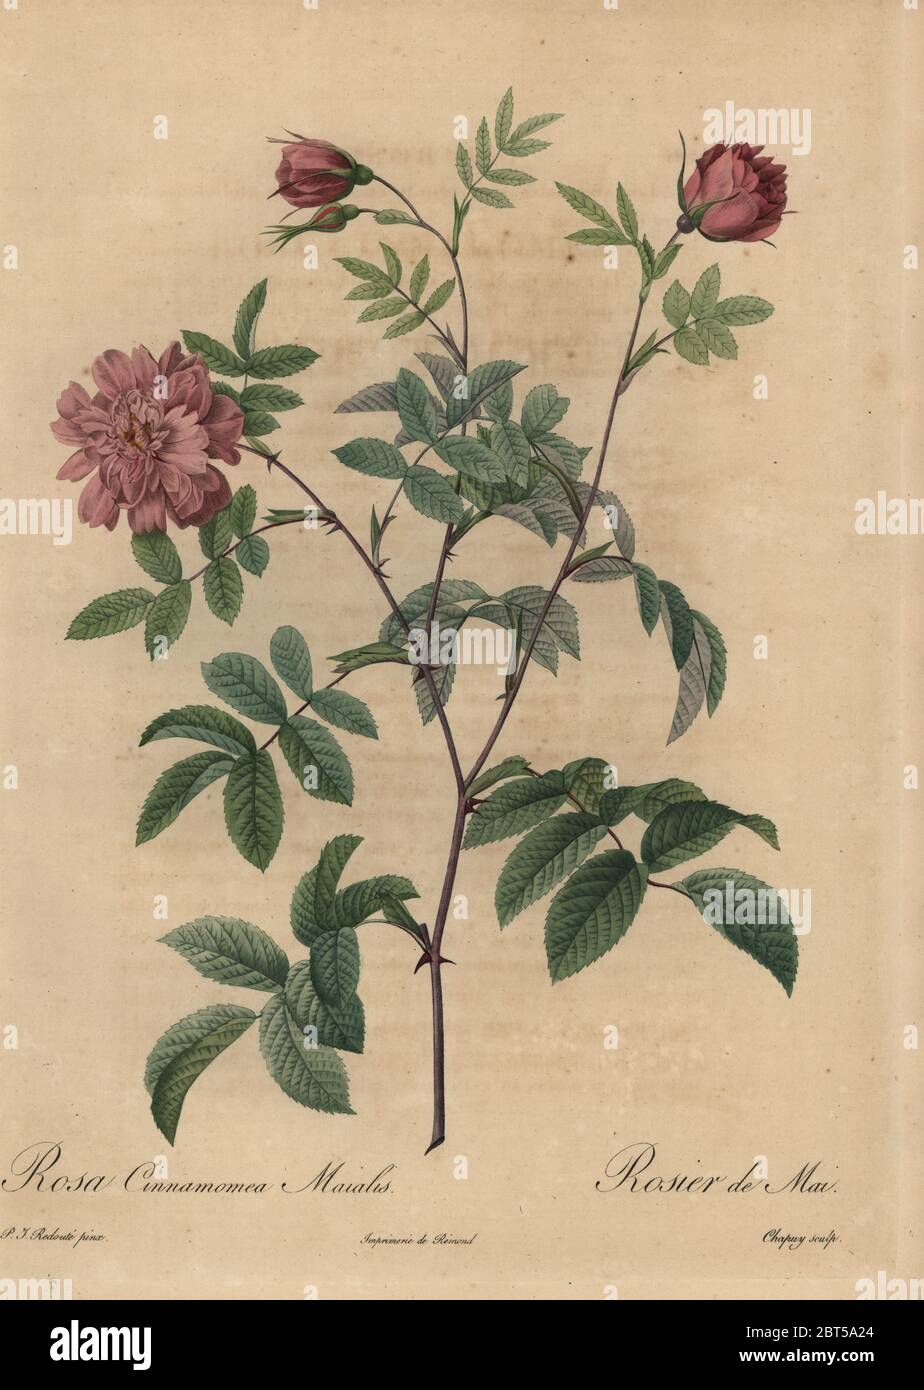 Pink cinnamon rose, Rosa majalis. Rosa cinnamomea maialis, Rosier de Mai. Stipple copperplate engraving by Jean Baptiste Chapuy handcoloured a la poupee after a botanical illustration by Pierre-Joseph Redoute from the first folio edition of Les Roses, Firmin Didot, Paris, 1817. Stock Photo